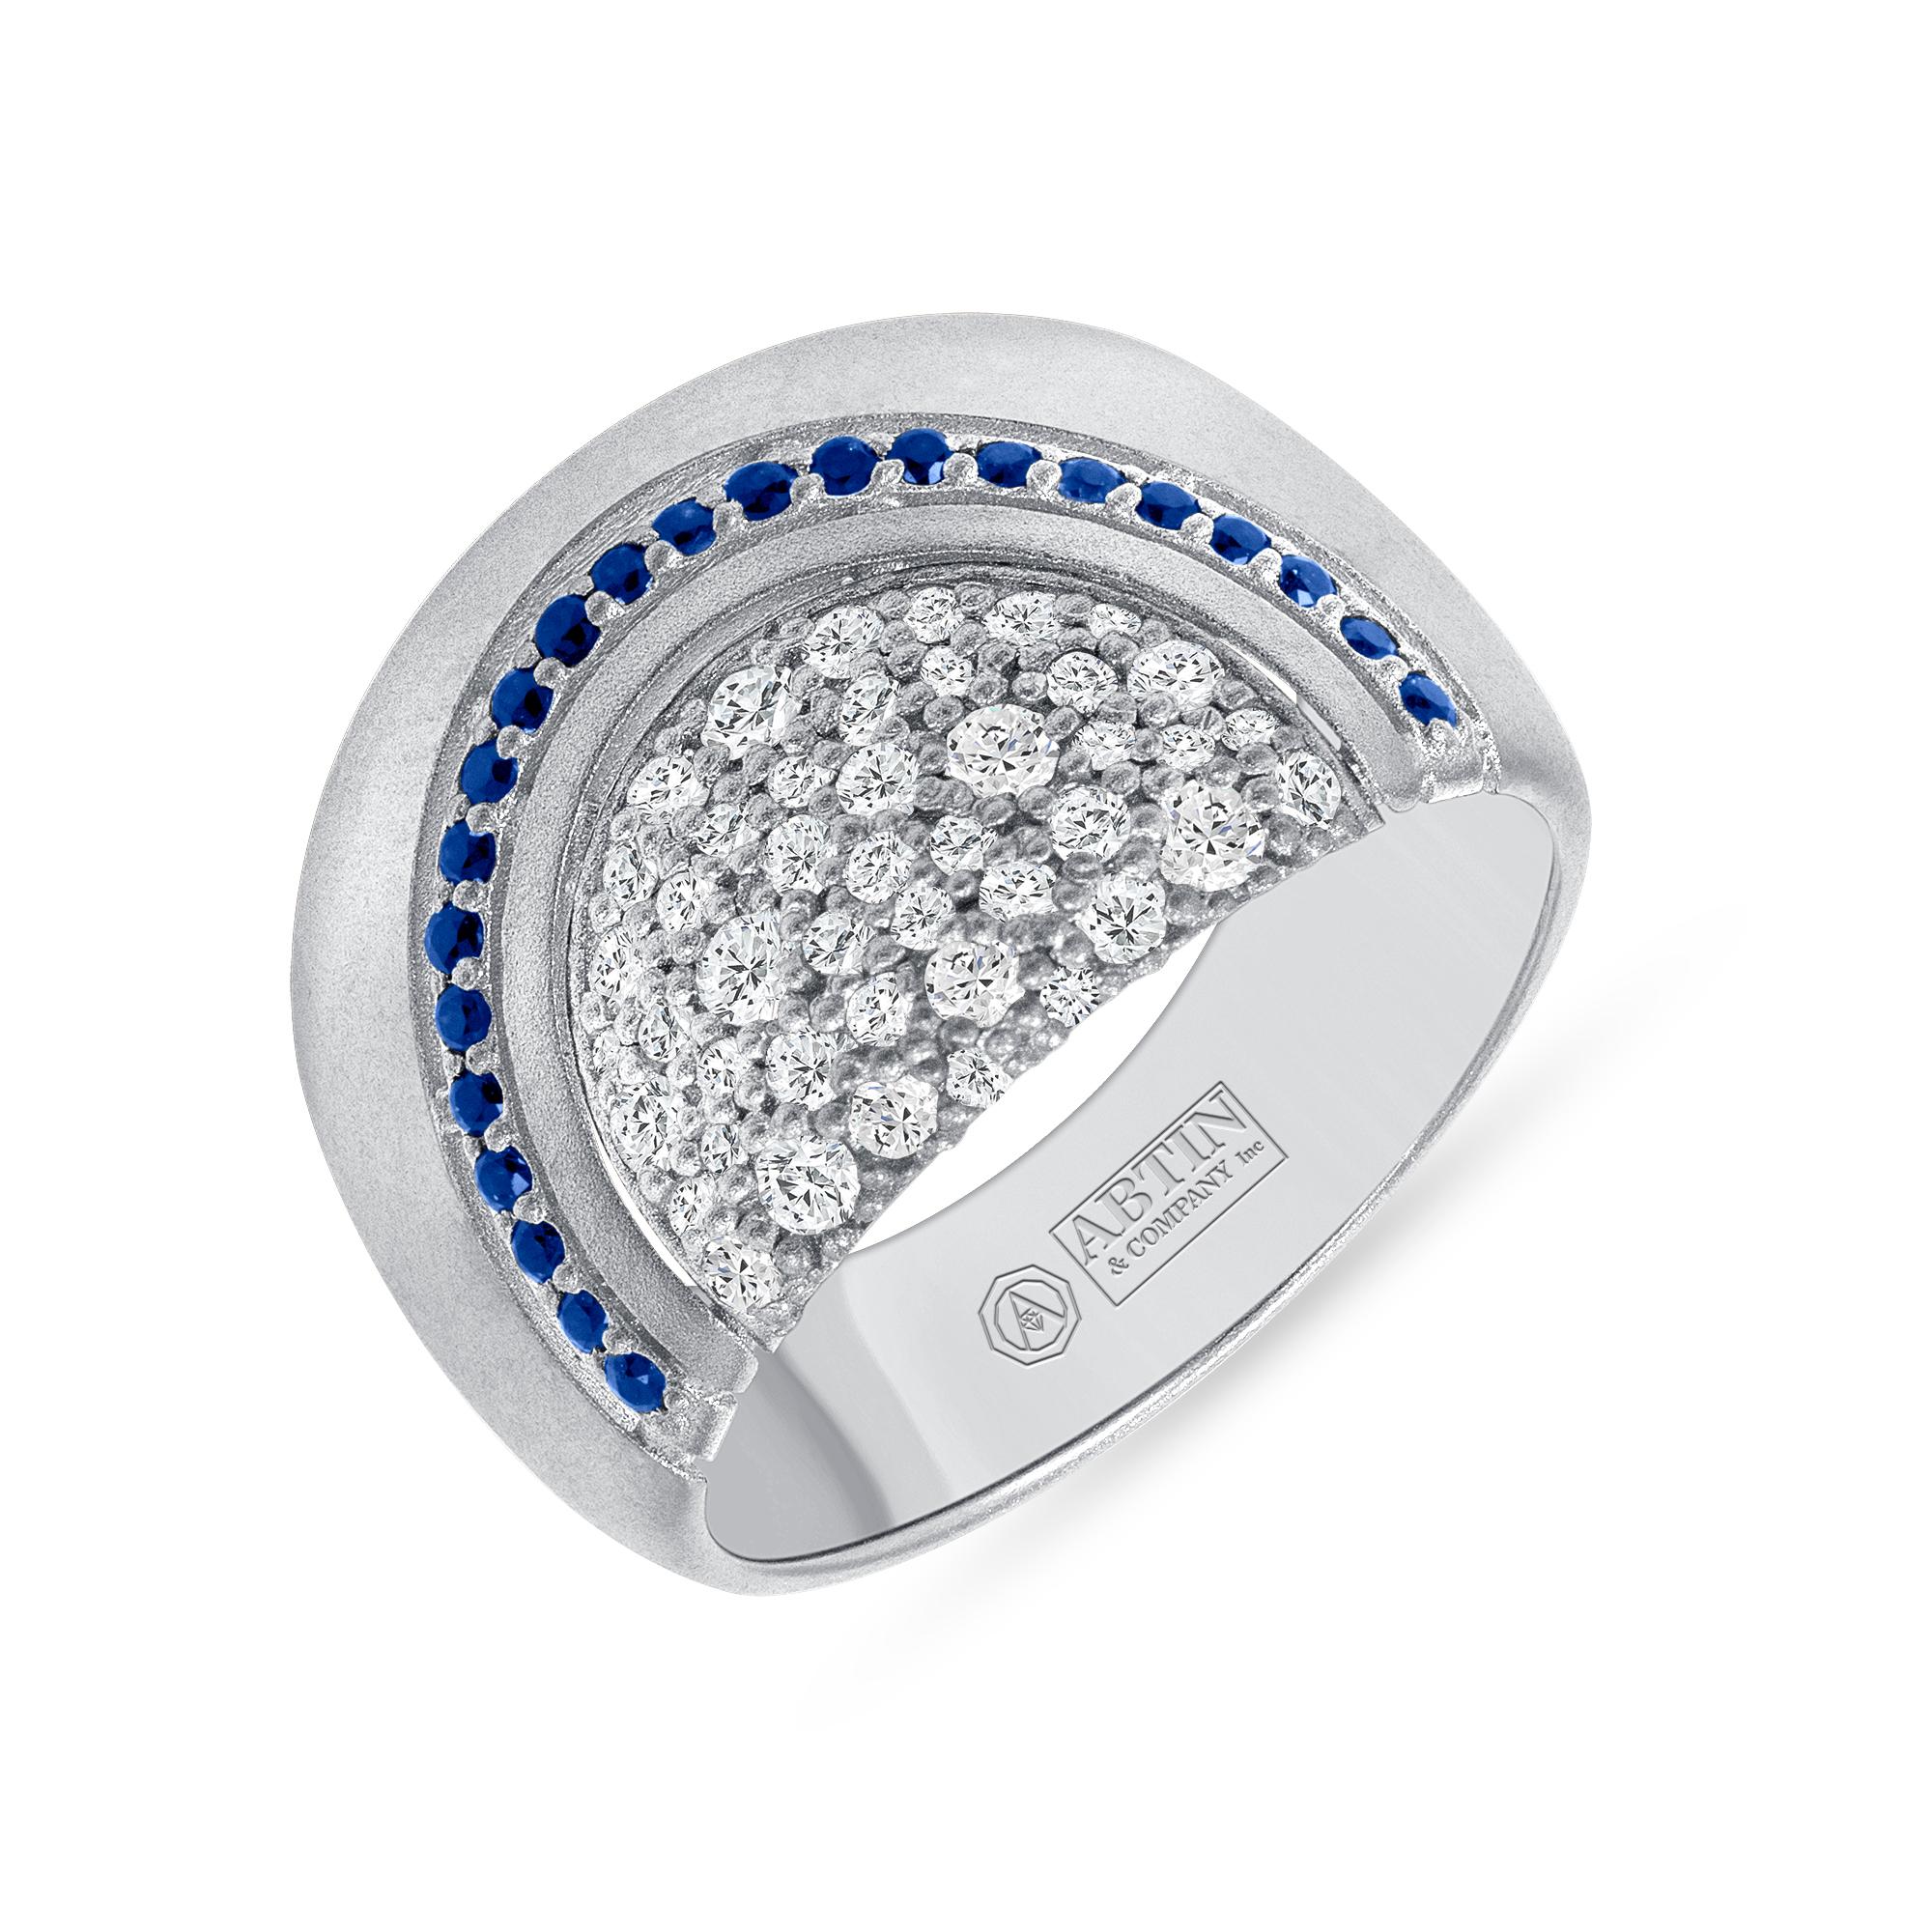 Crafted in 14K gold, this exquisite ring features a dazzling arrangement of 0.68 carats of diamonds and blue sapphire. Its high-domed design sparkles with round brilliant-cut diamonds and round-cut blue sapphire. The rich, satin blue of the blue